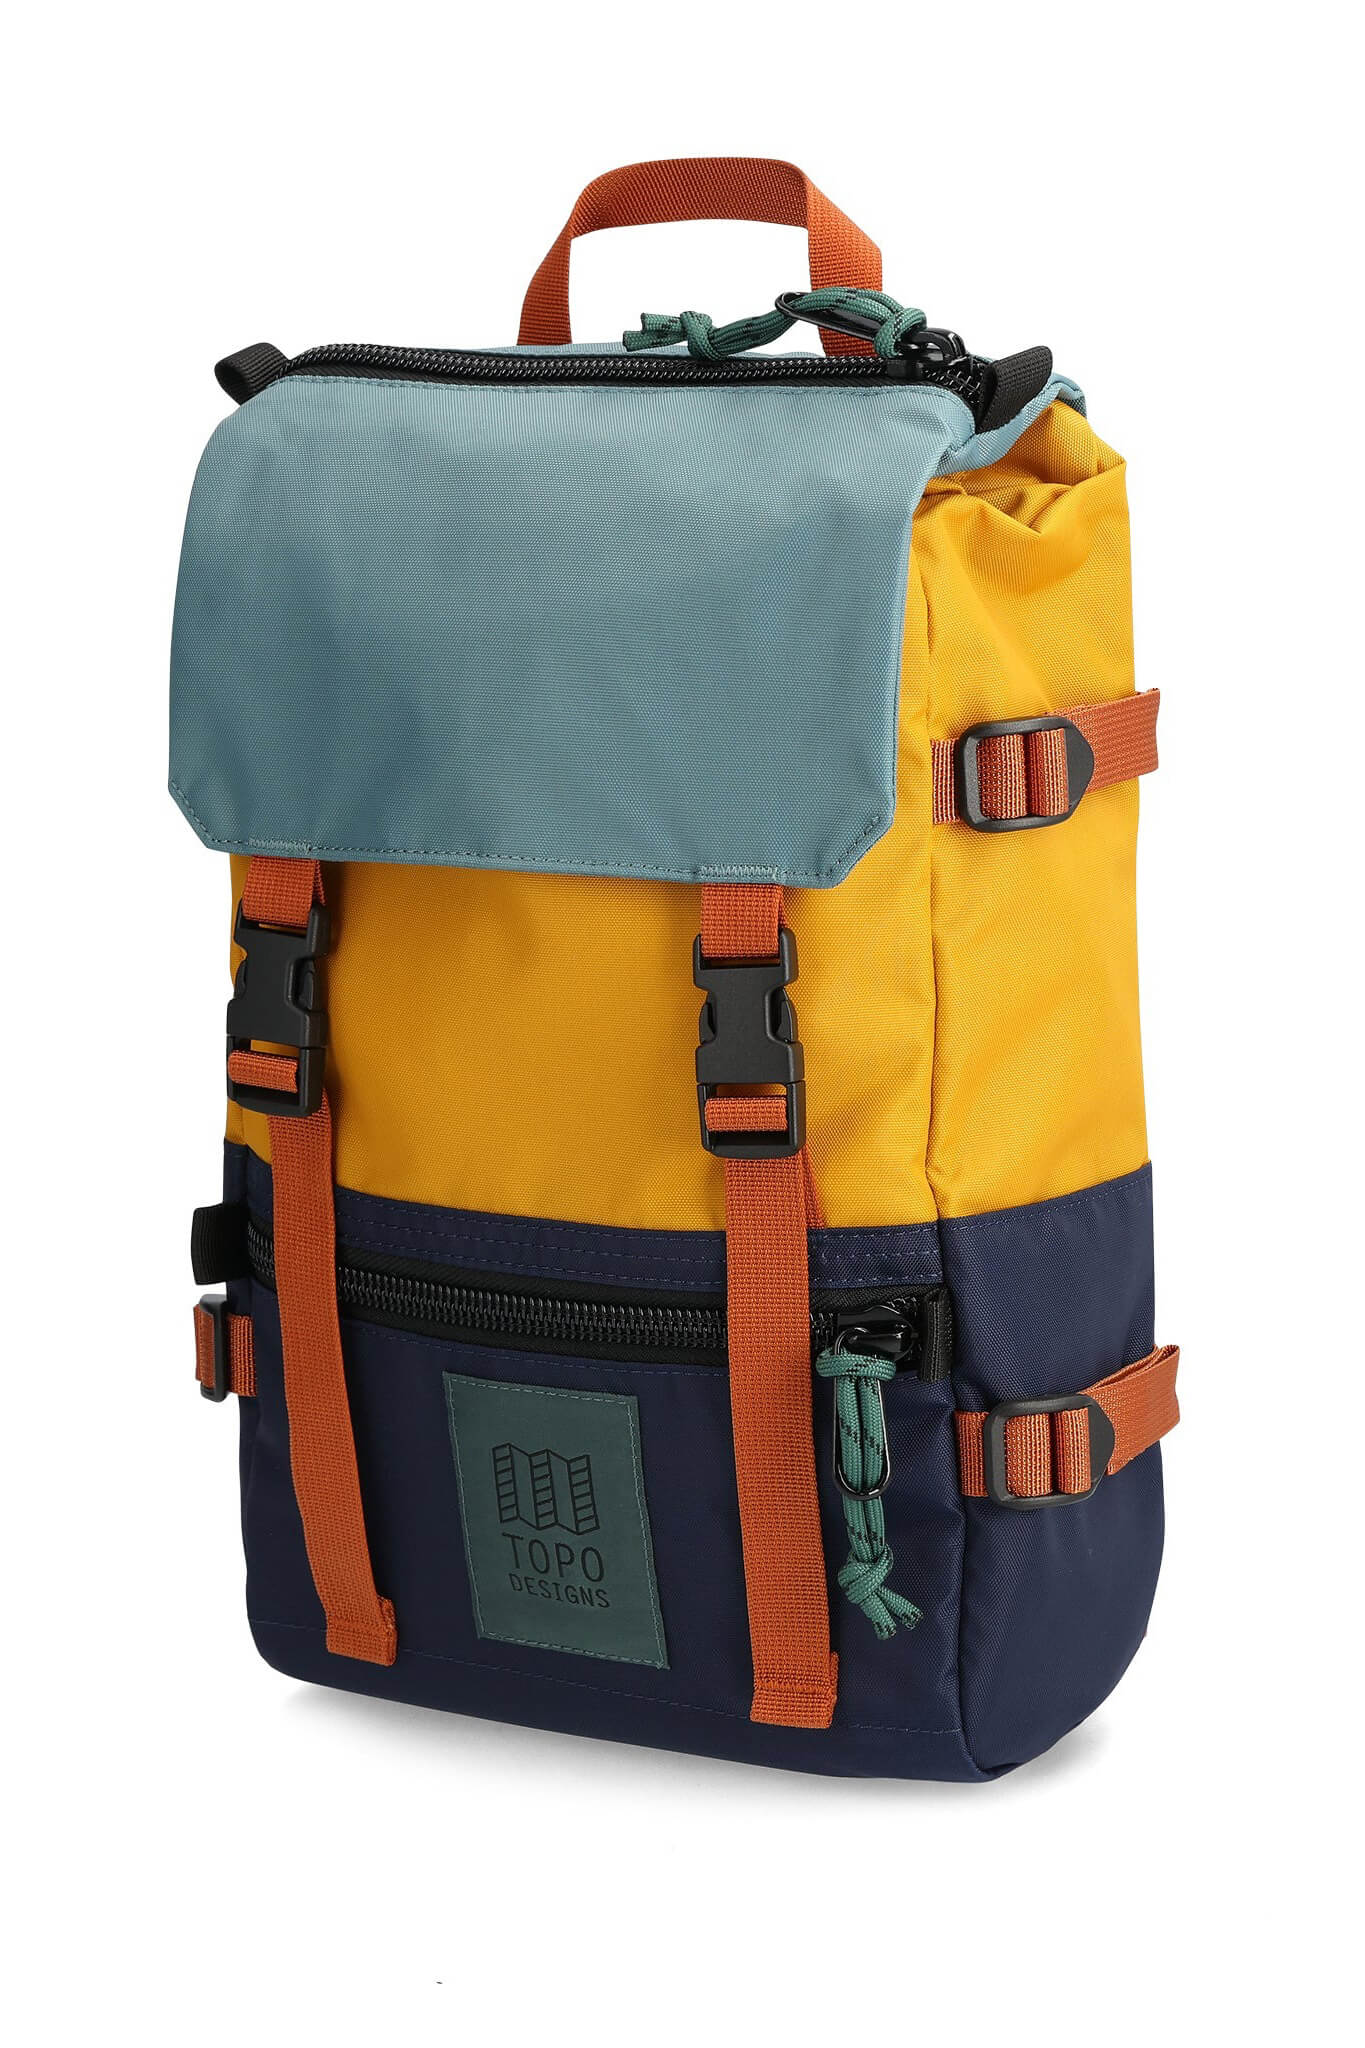 Topo Designs rover pack mini in navy and mustard